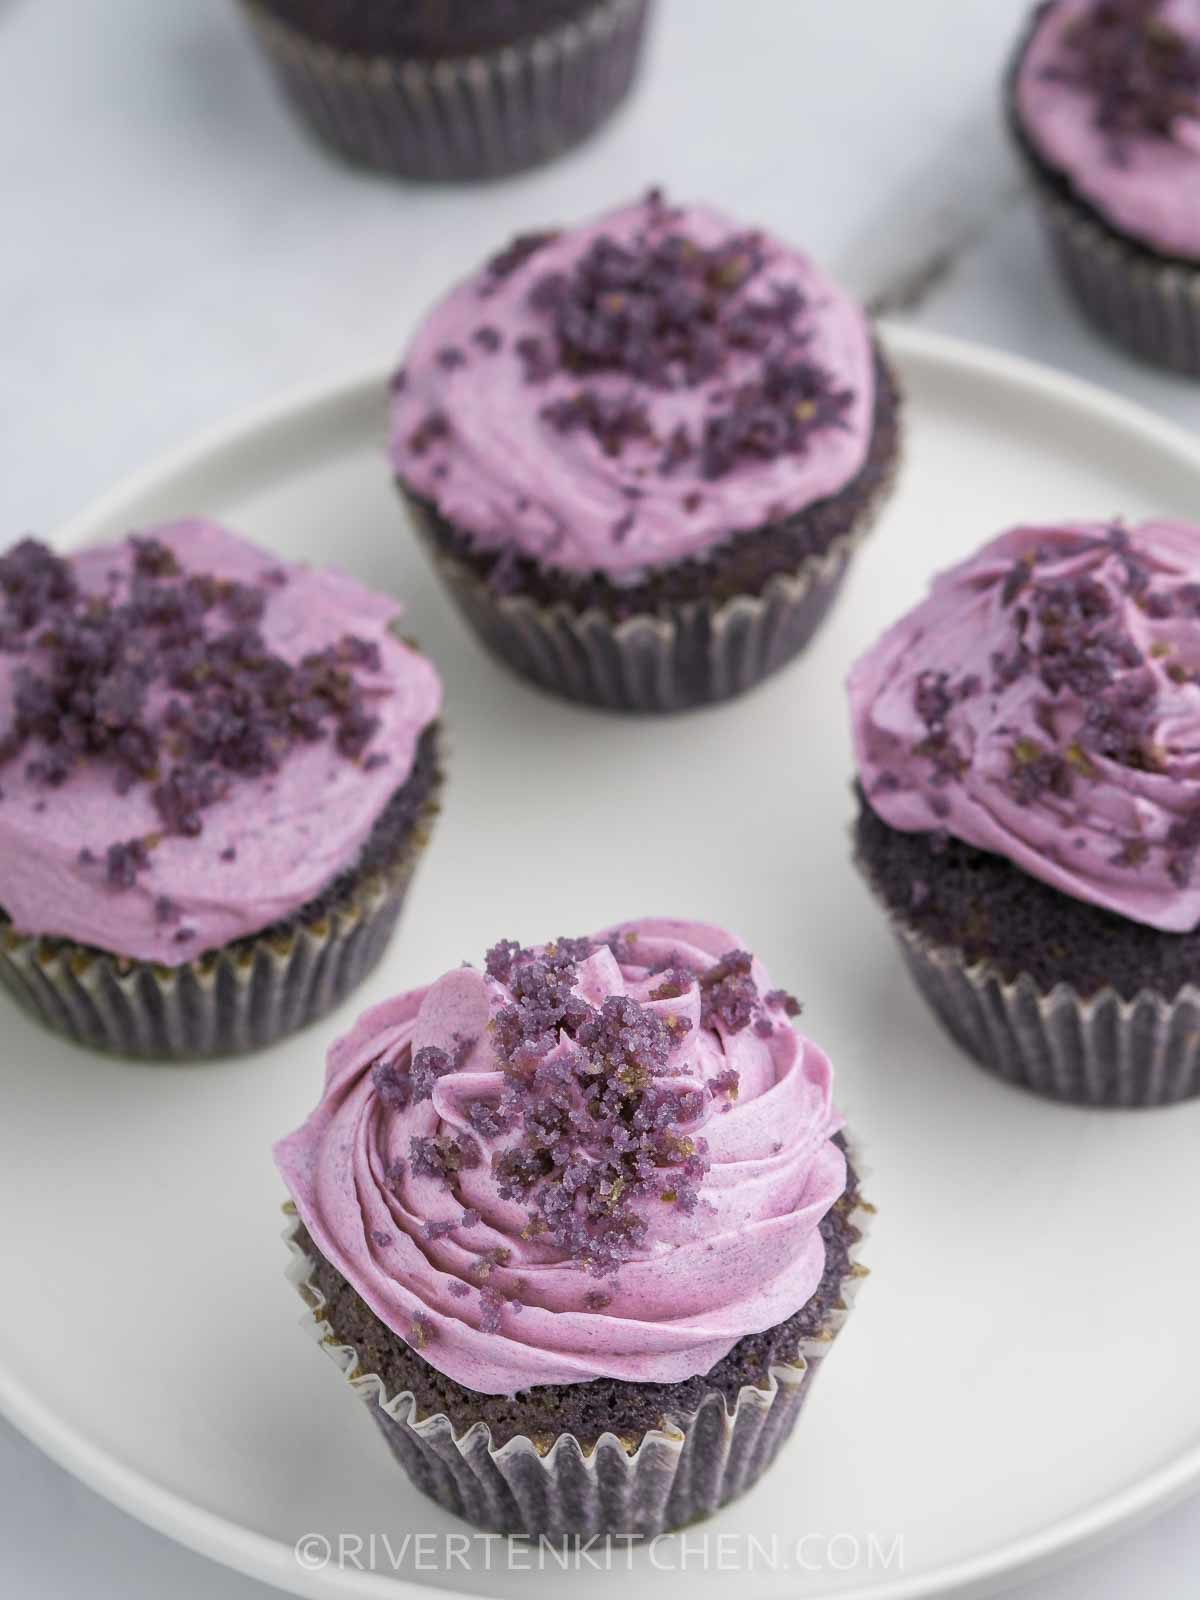 Moist and Fluffy Cupcakes with Ube Flavor